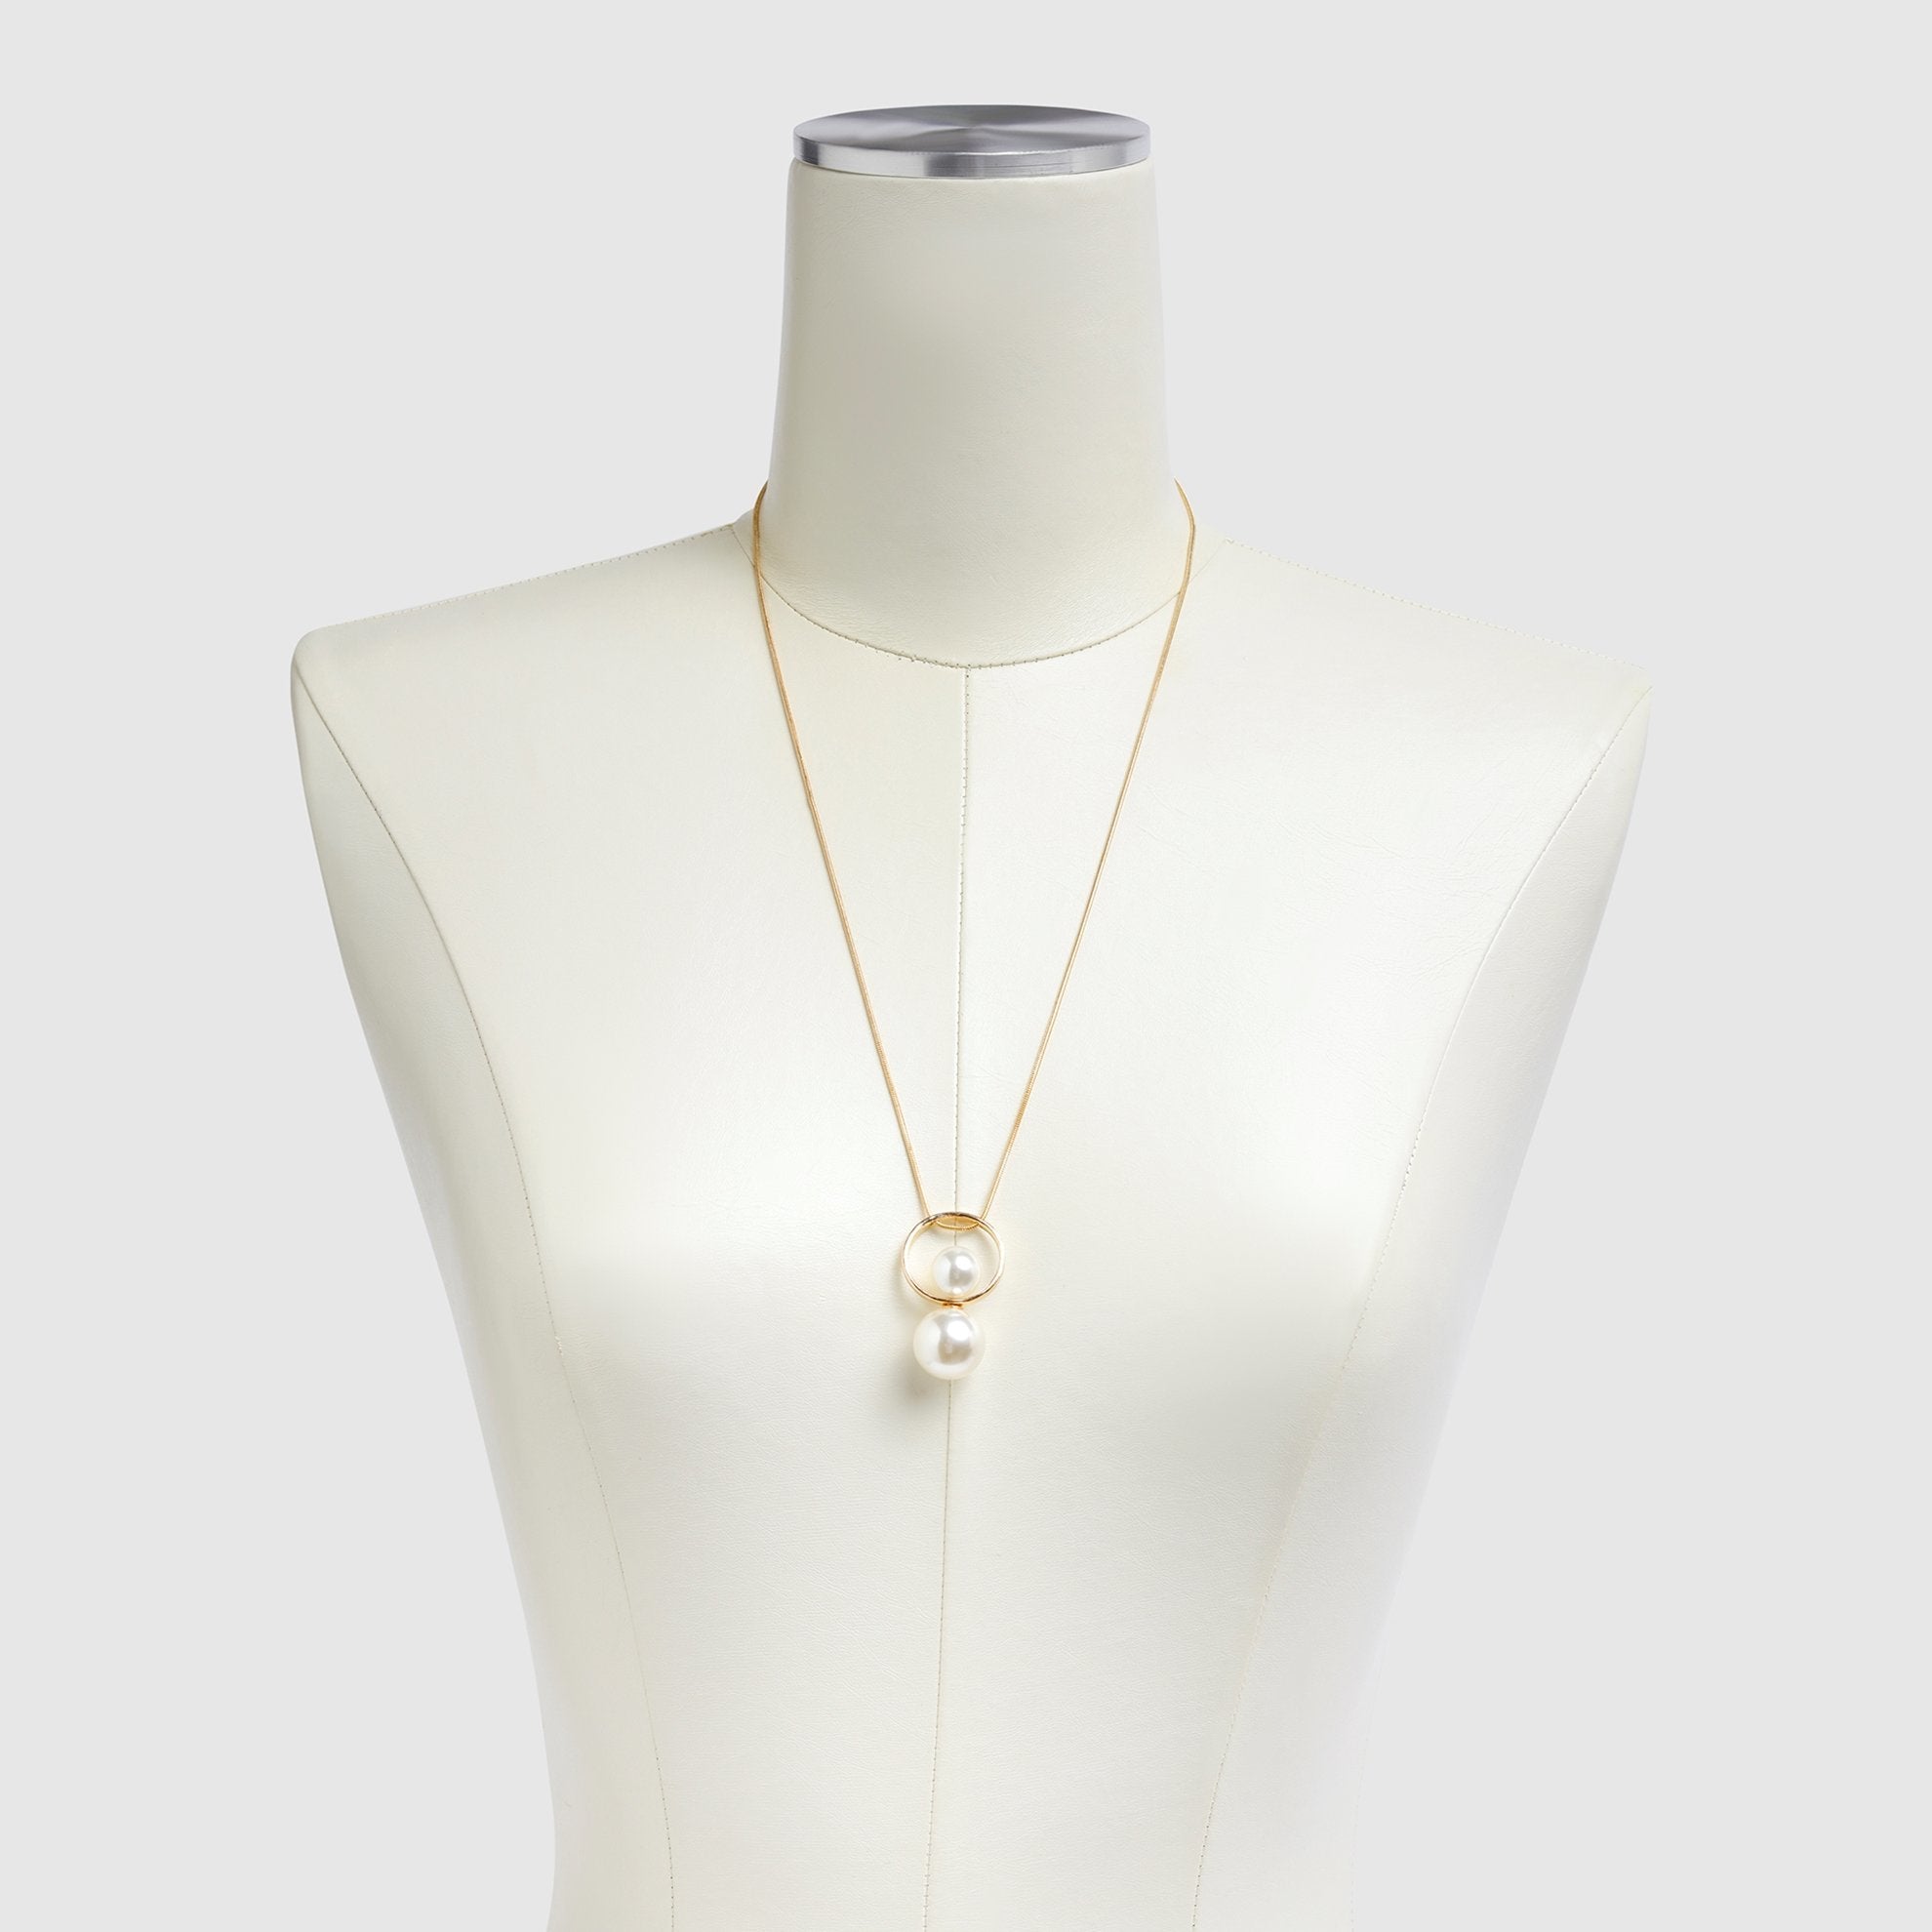 Double Pearl Necklace on Dress Form